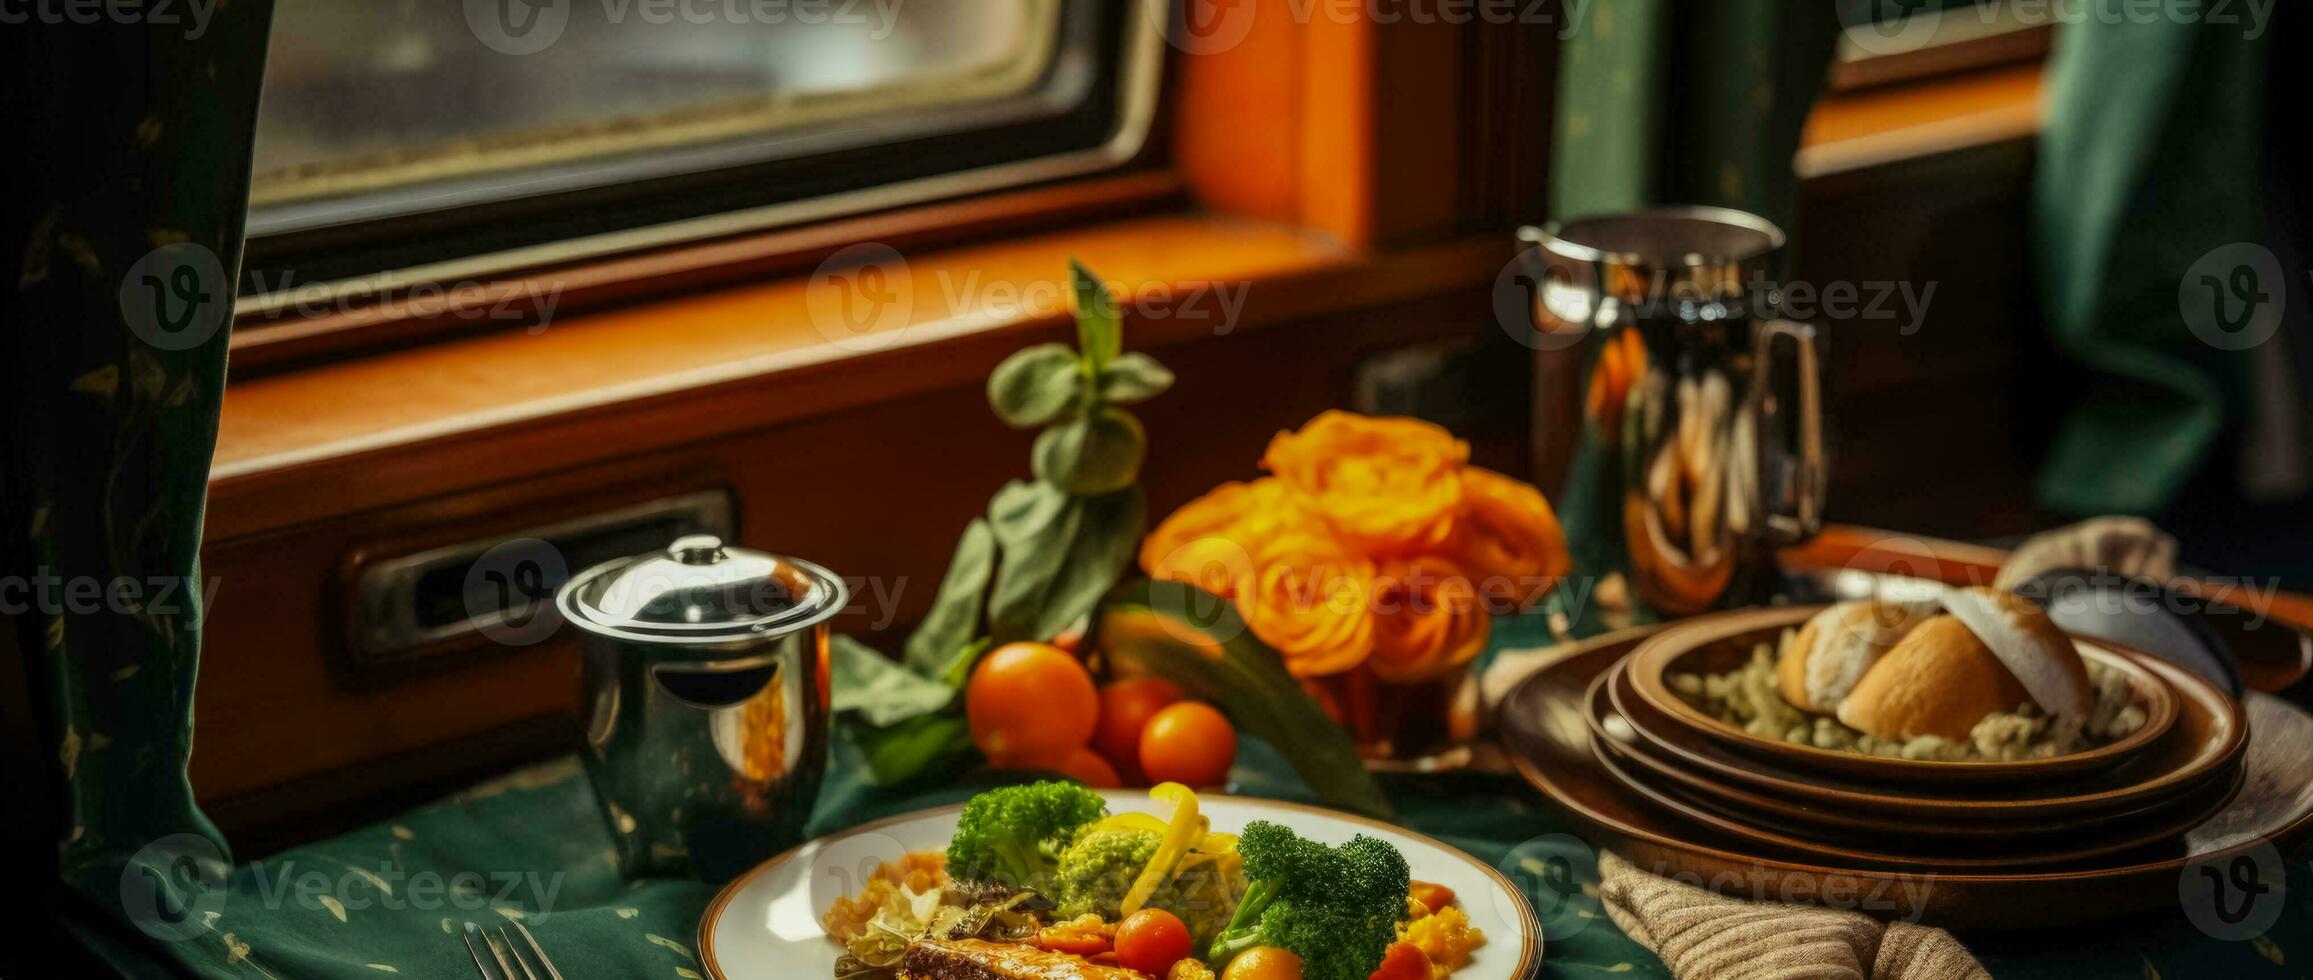 Delicious meals served in train dining cars photo